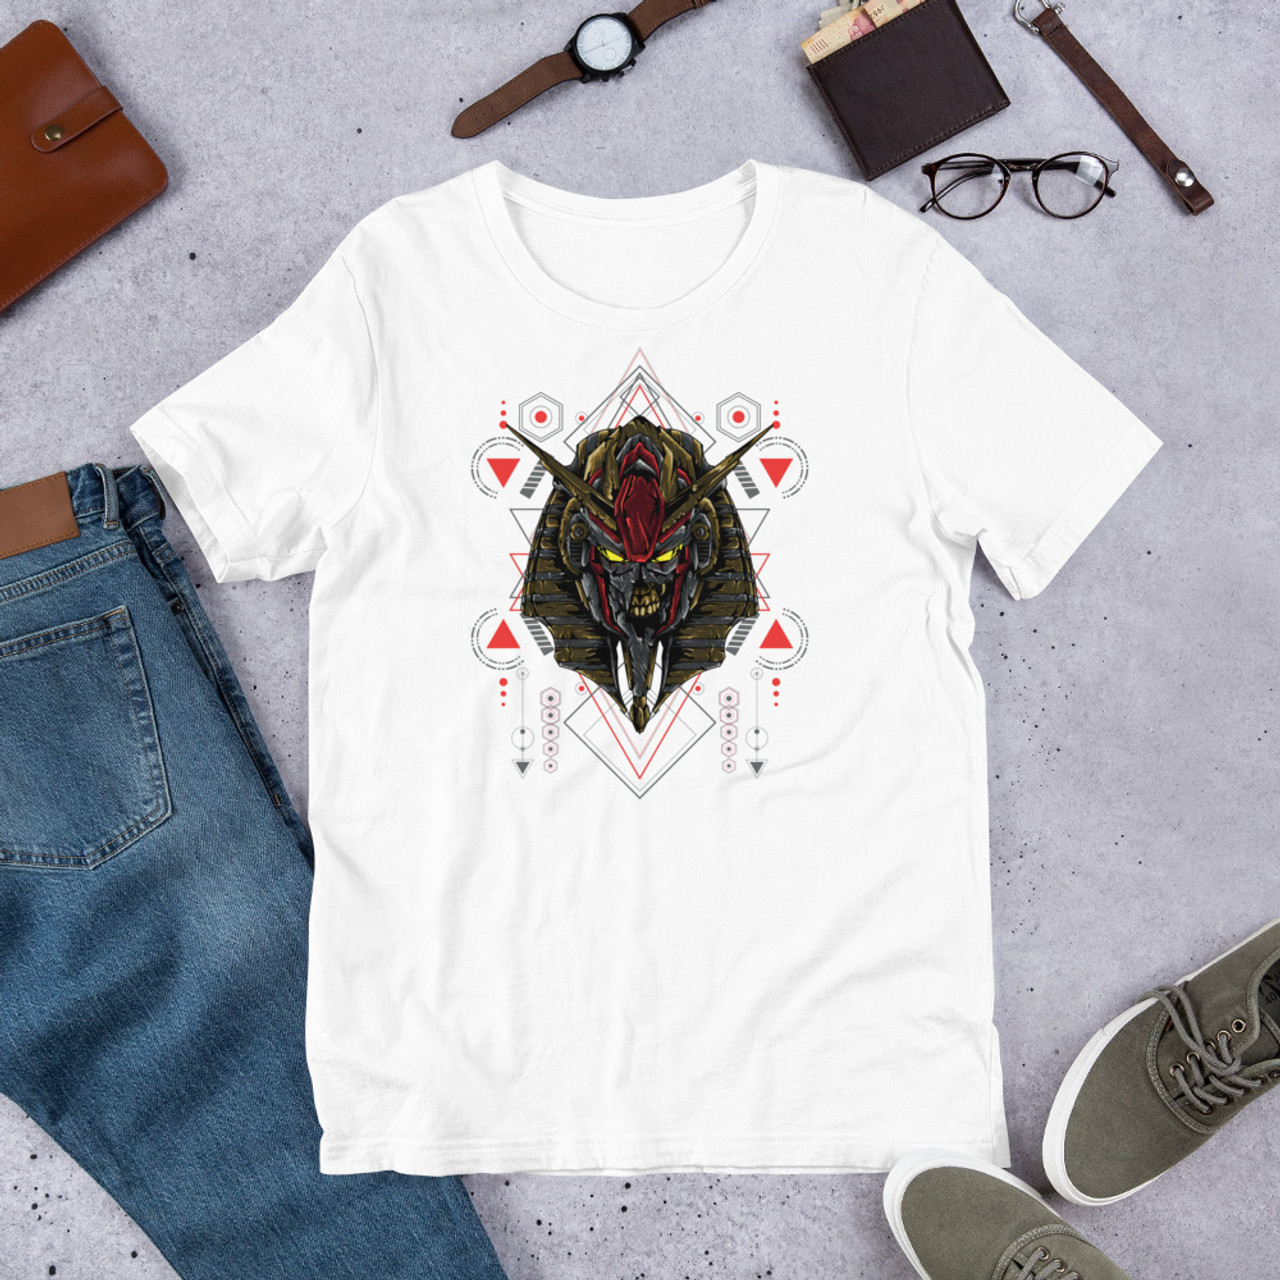 White T-Shirt - Bella + Canvas 3001 Anubis Egyptian God of the Dead